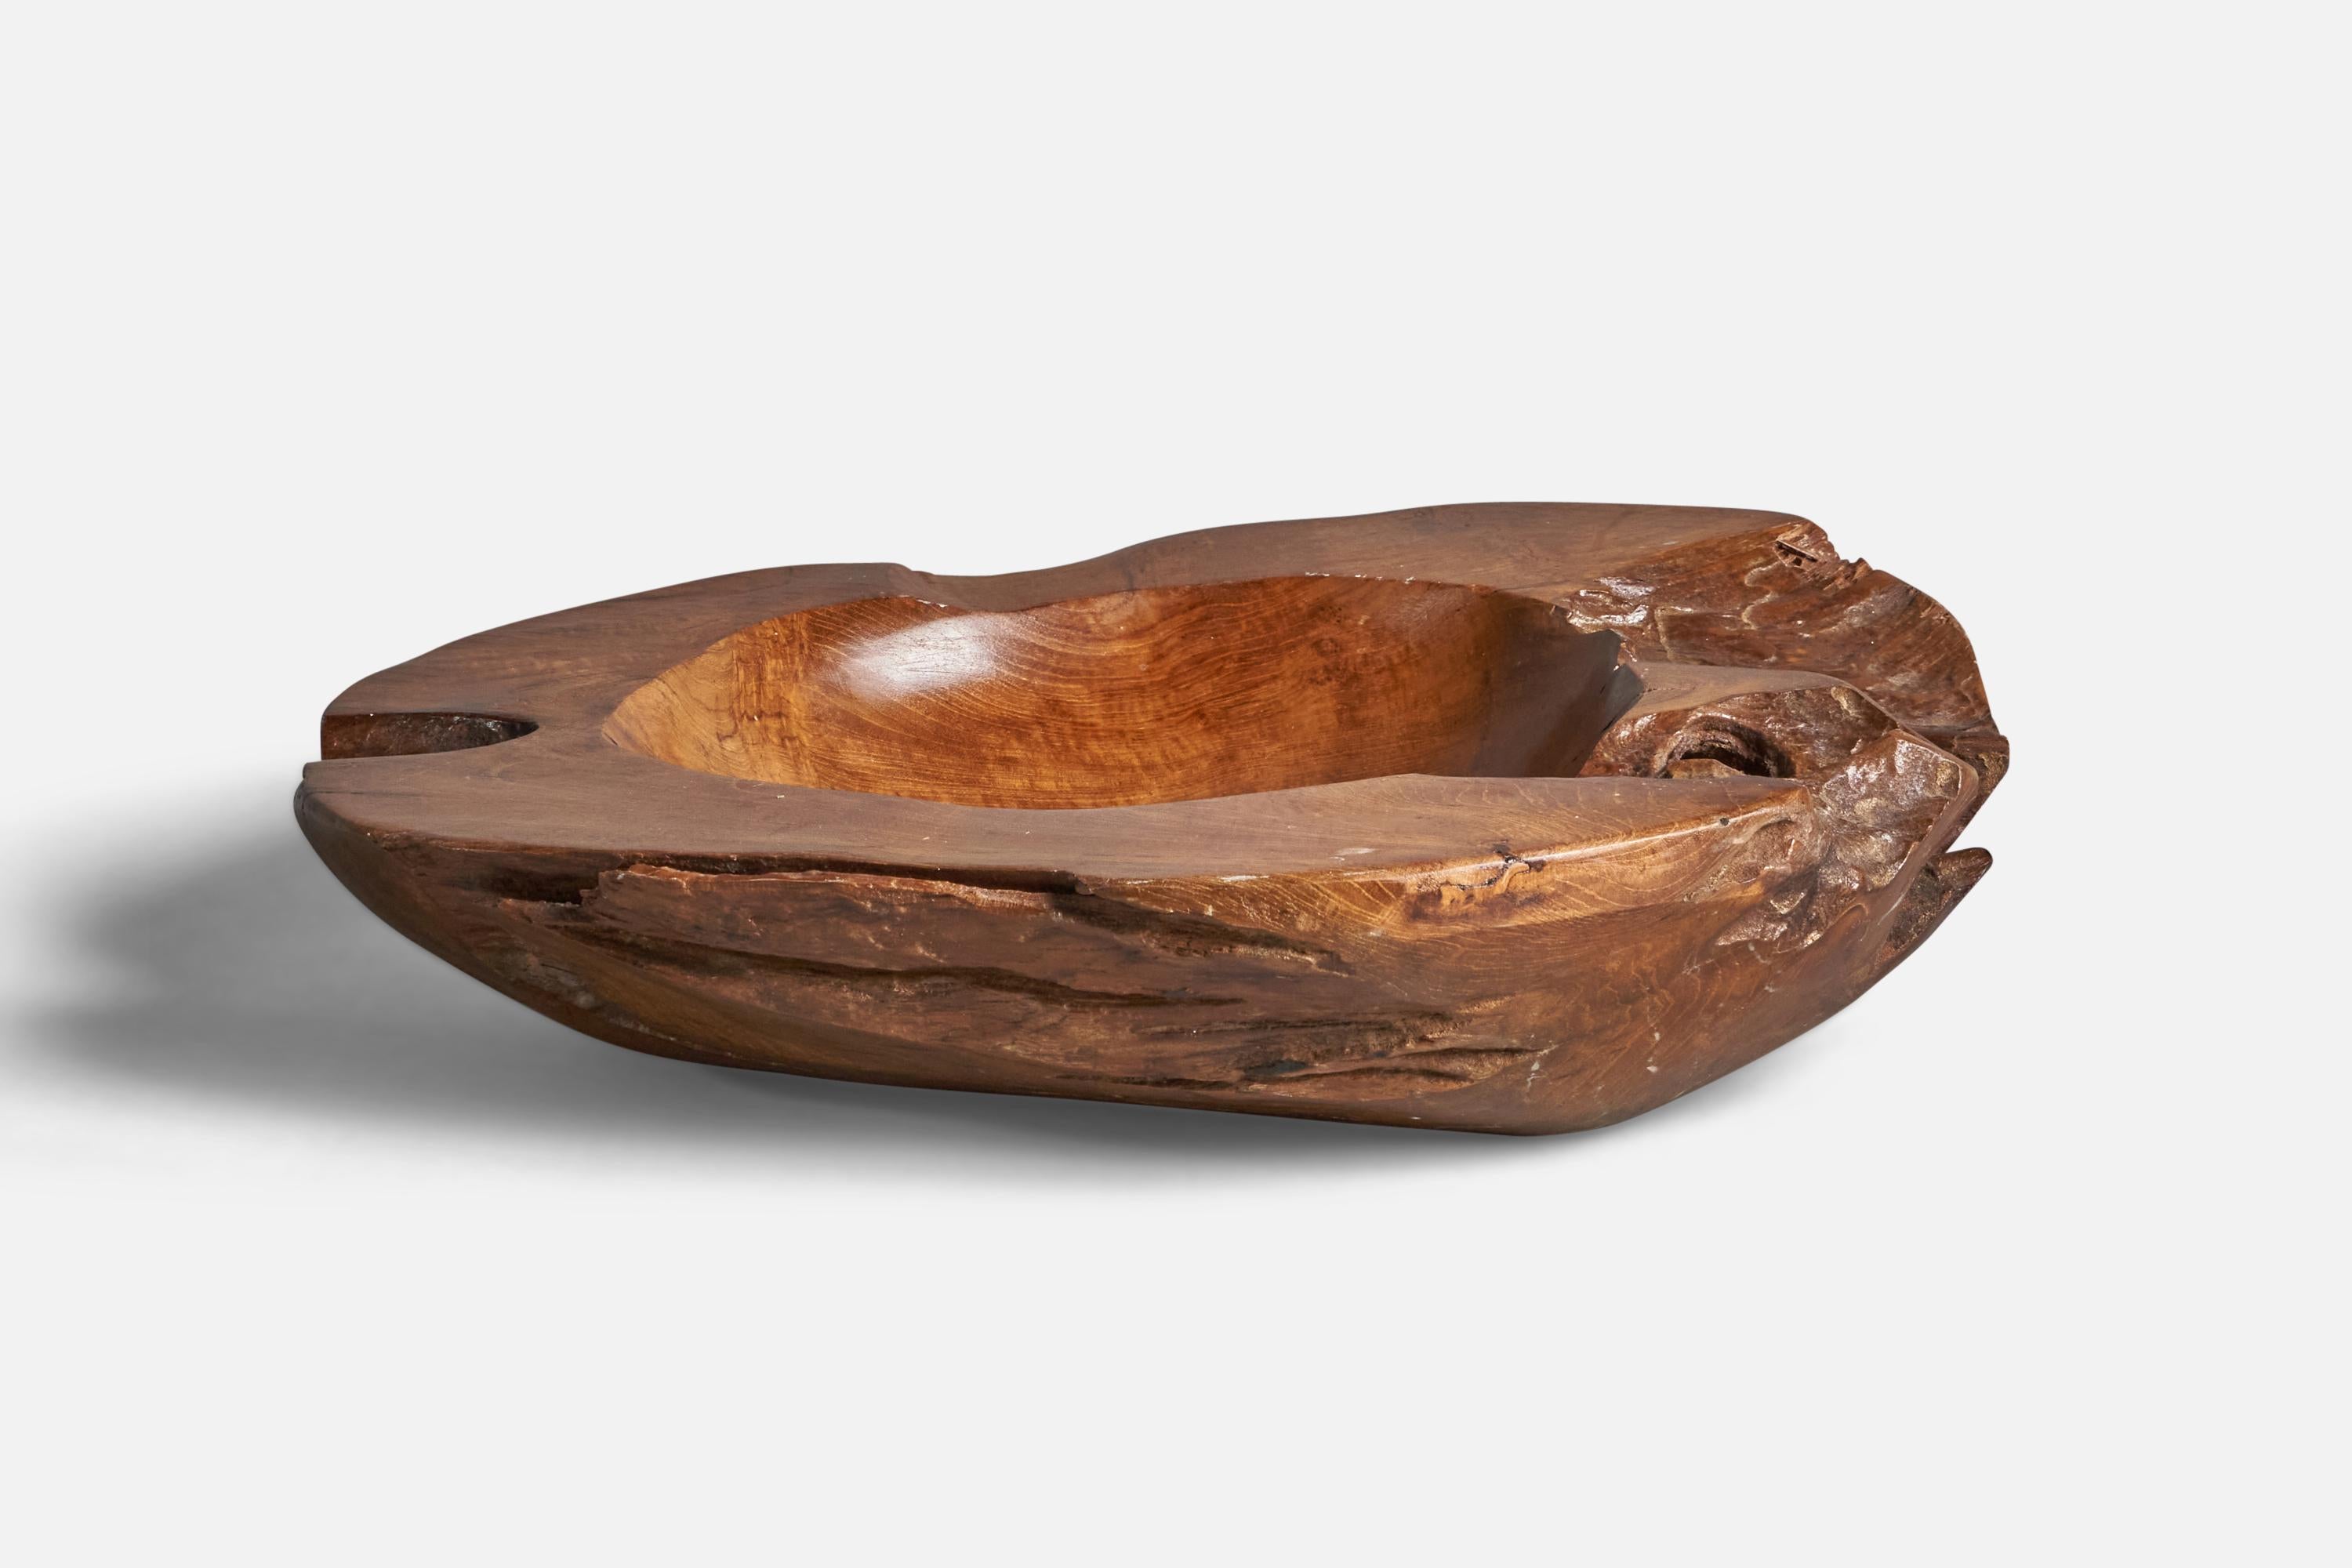 A sizeable freeform walnut bowl designed and produced in the US, c. 1960s.